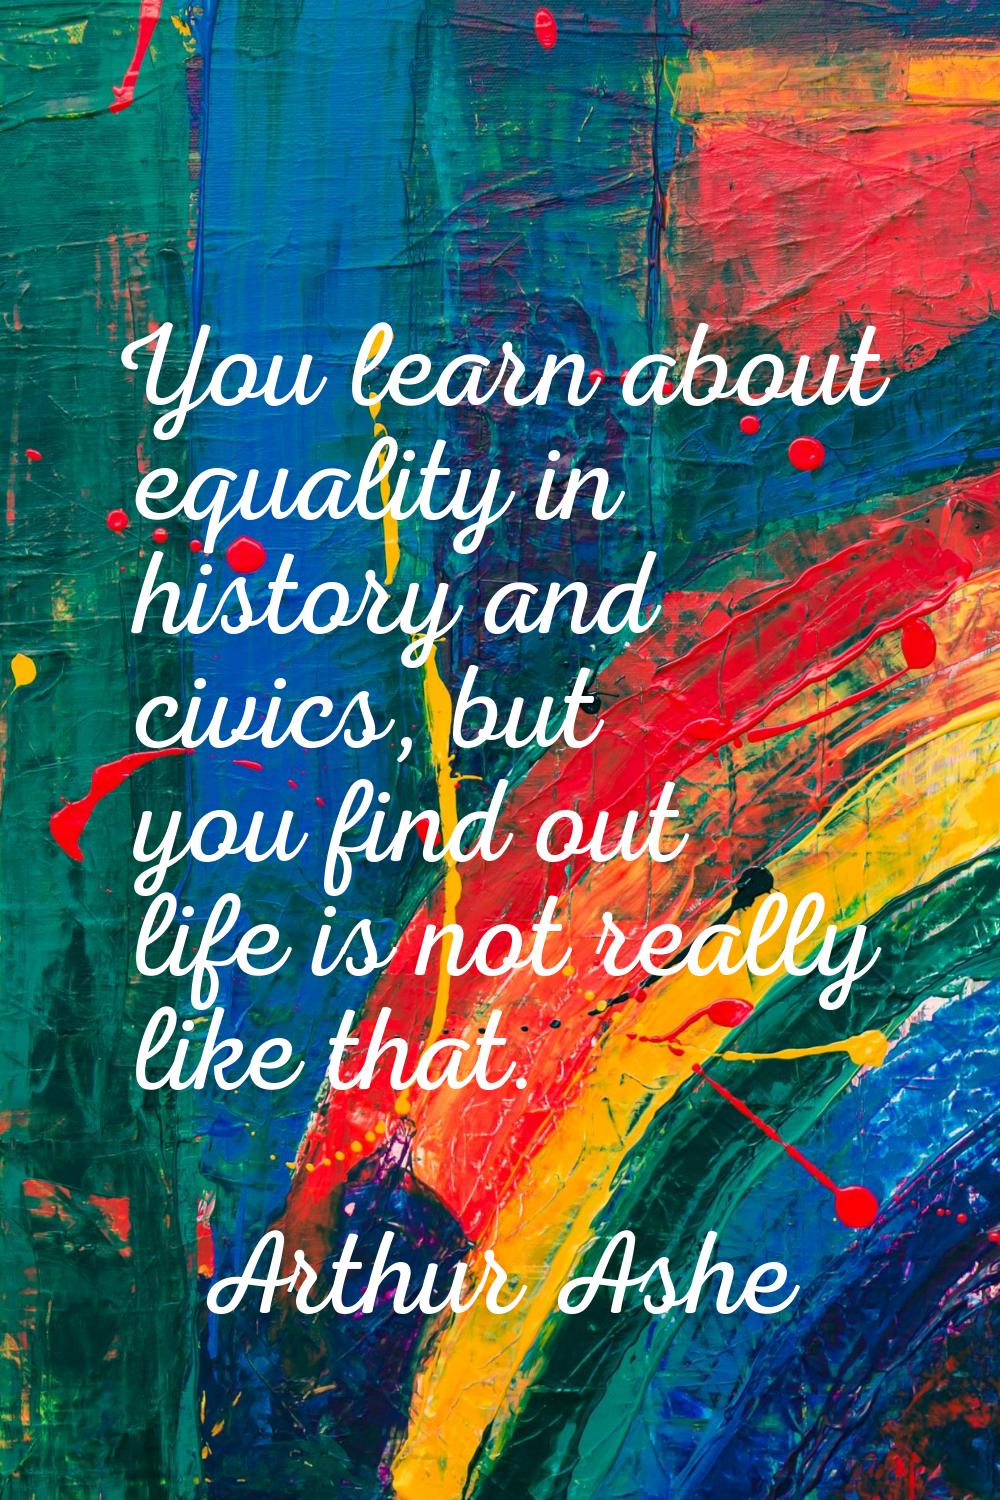 You learn about equality in history and civics, but you find out life is not really like that.